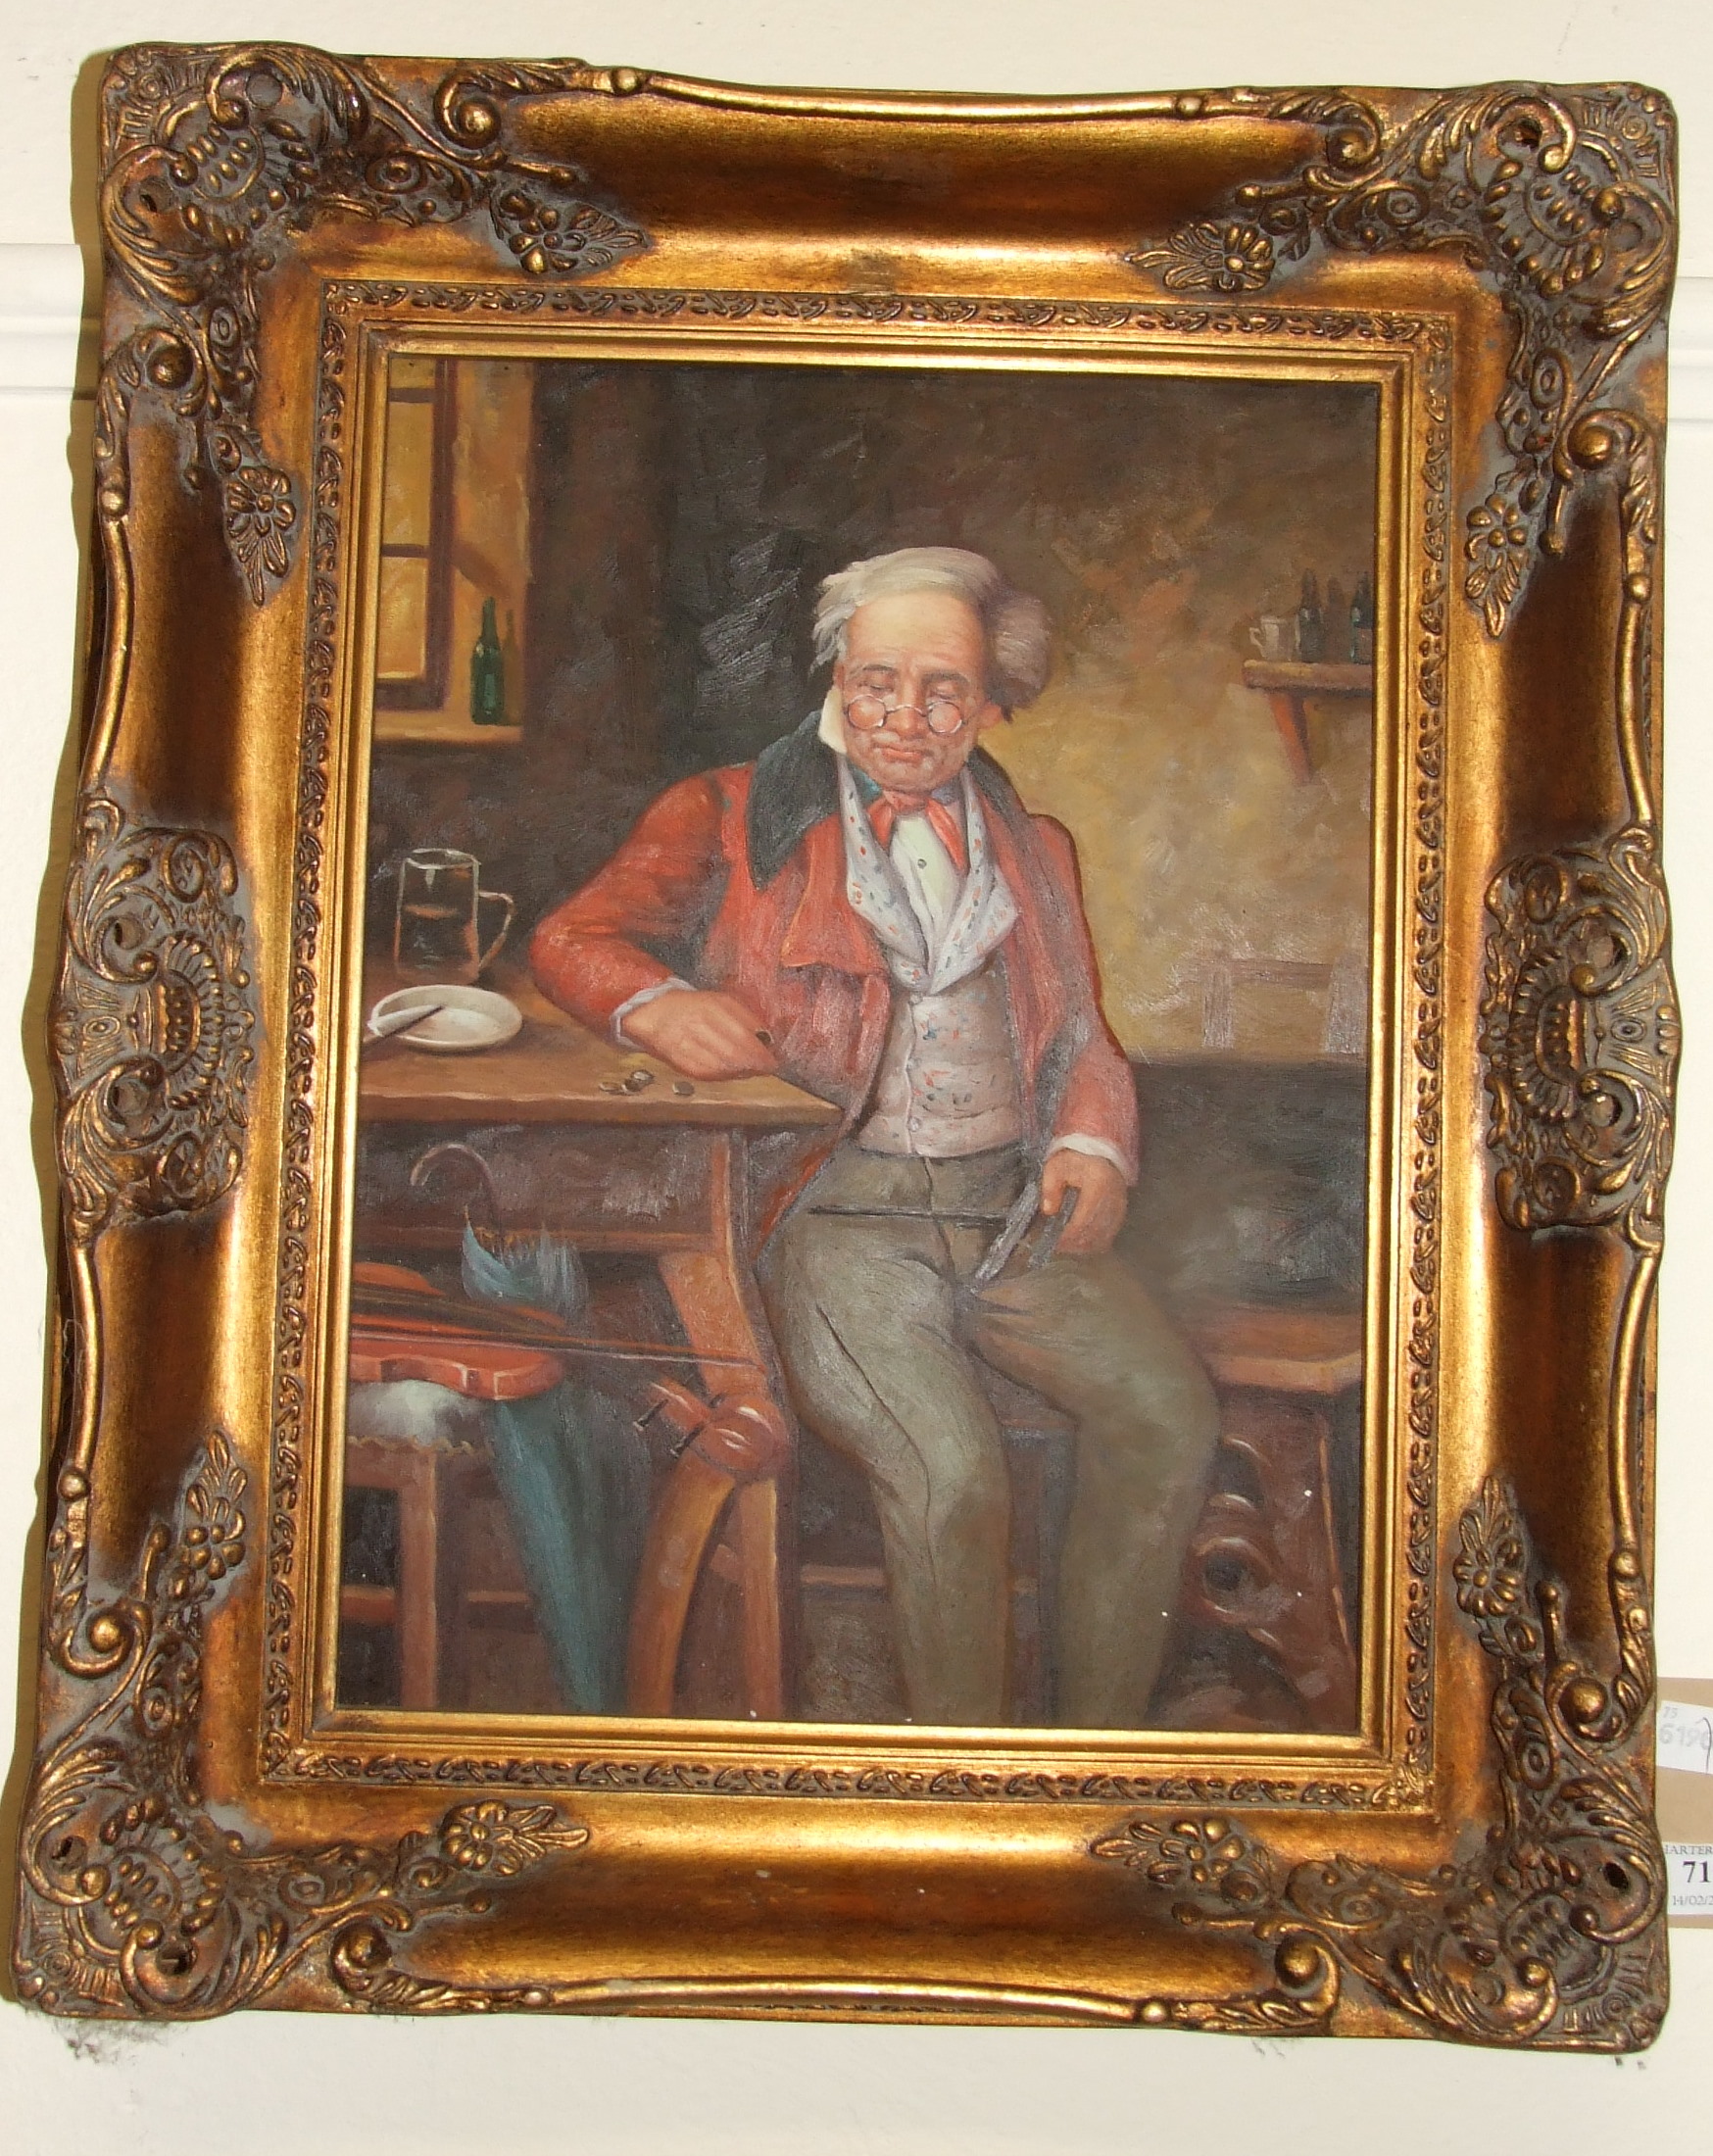 A painting of a musician in an interior, 39 x 29 cm